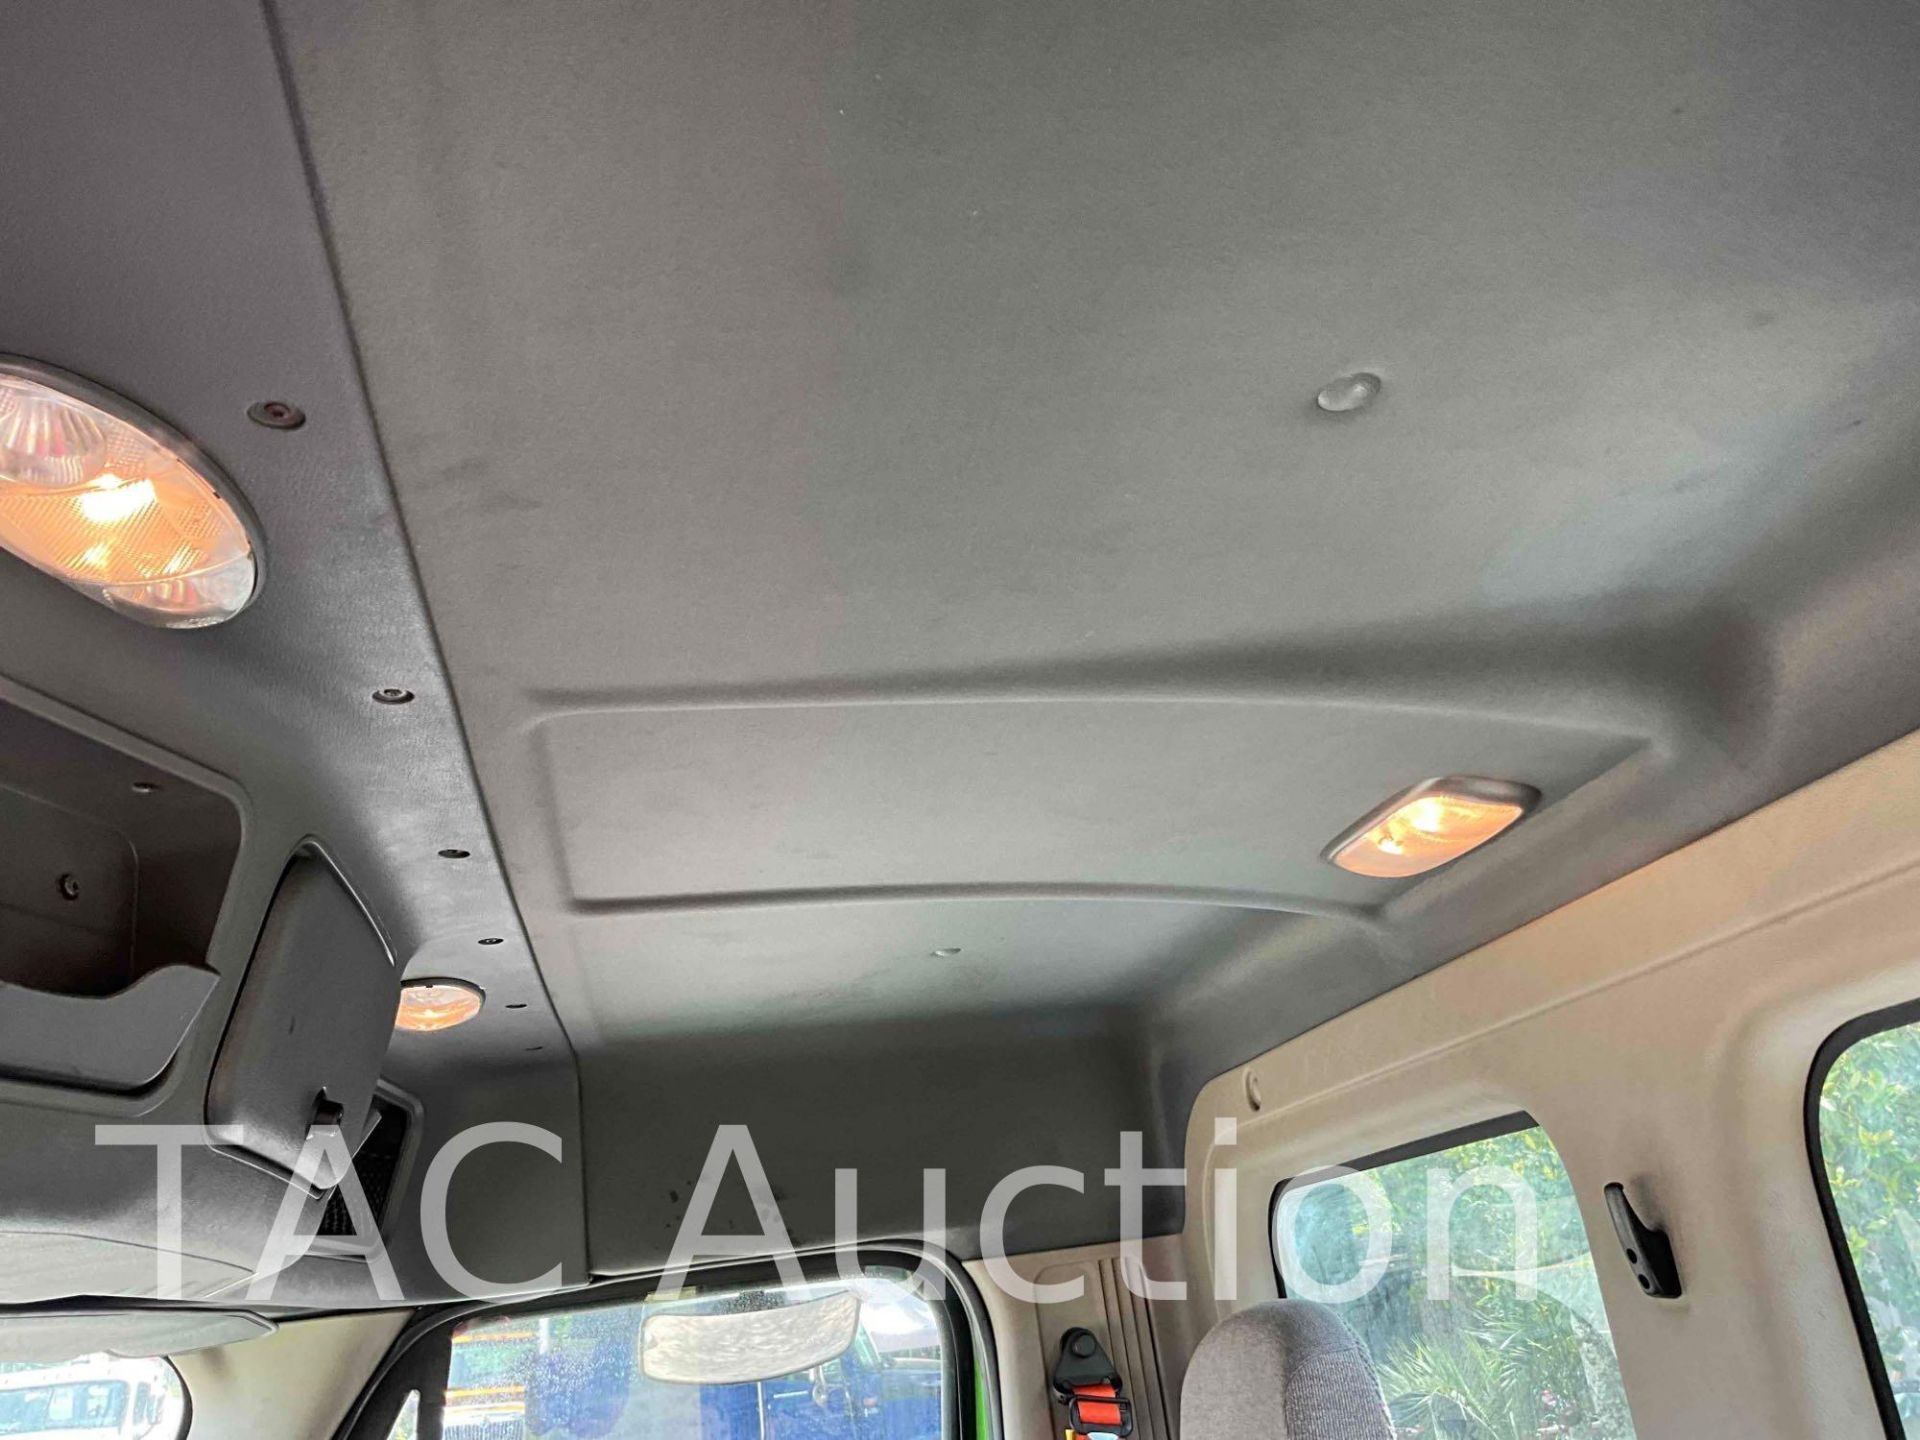 2016 Freightliner Cascadia Day Cab - Image 34 of 78